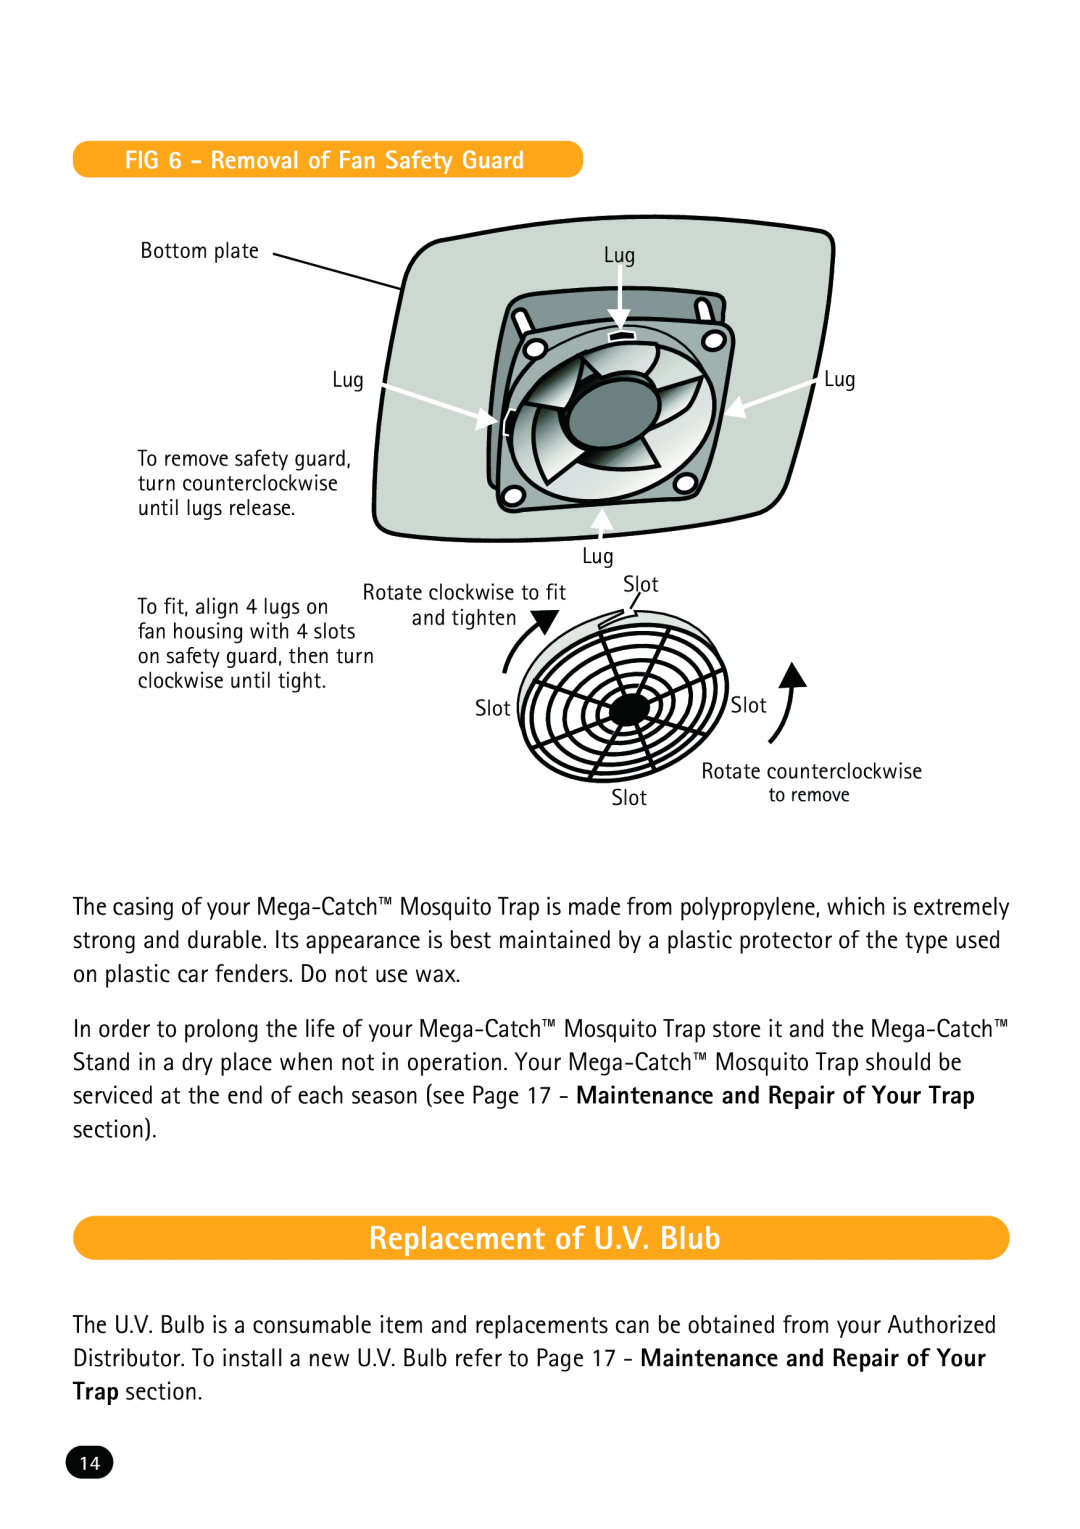 Mega Catch MCP800 operation manual Replacement of U.V. Blub, Removal of Fan Safety Guard 